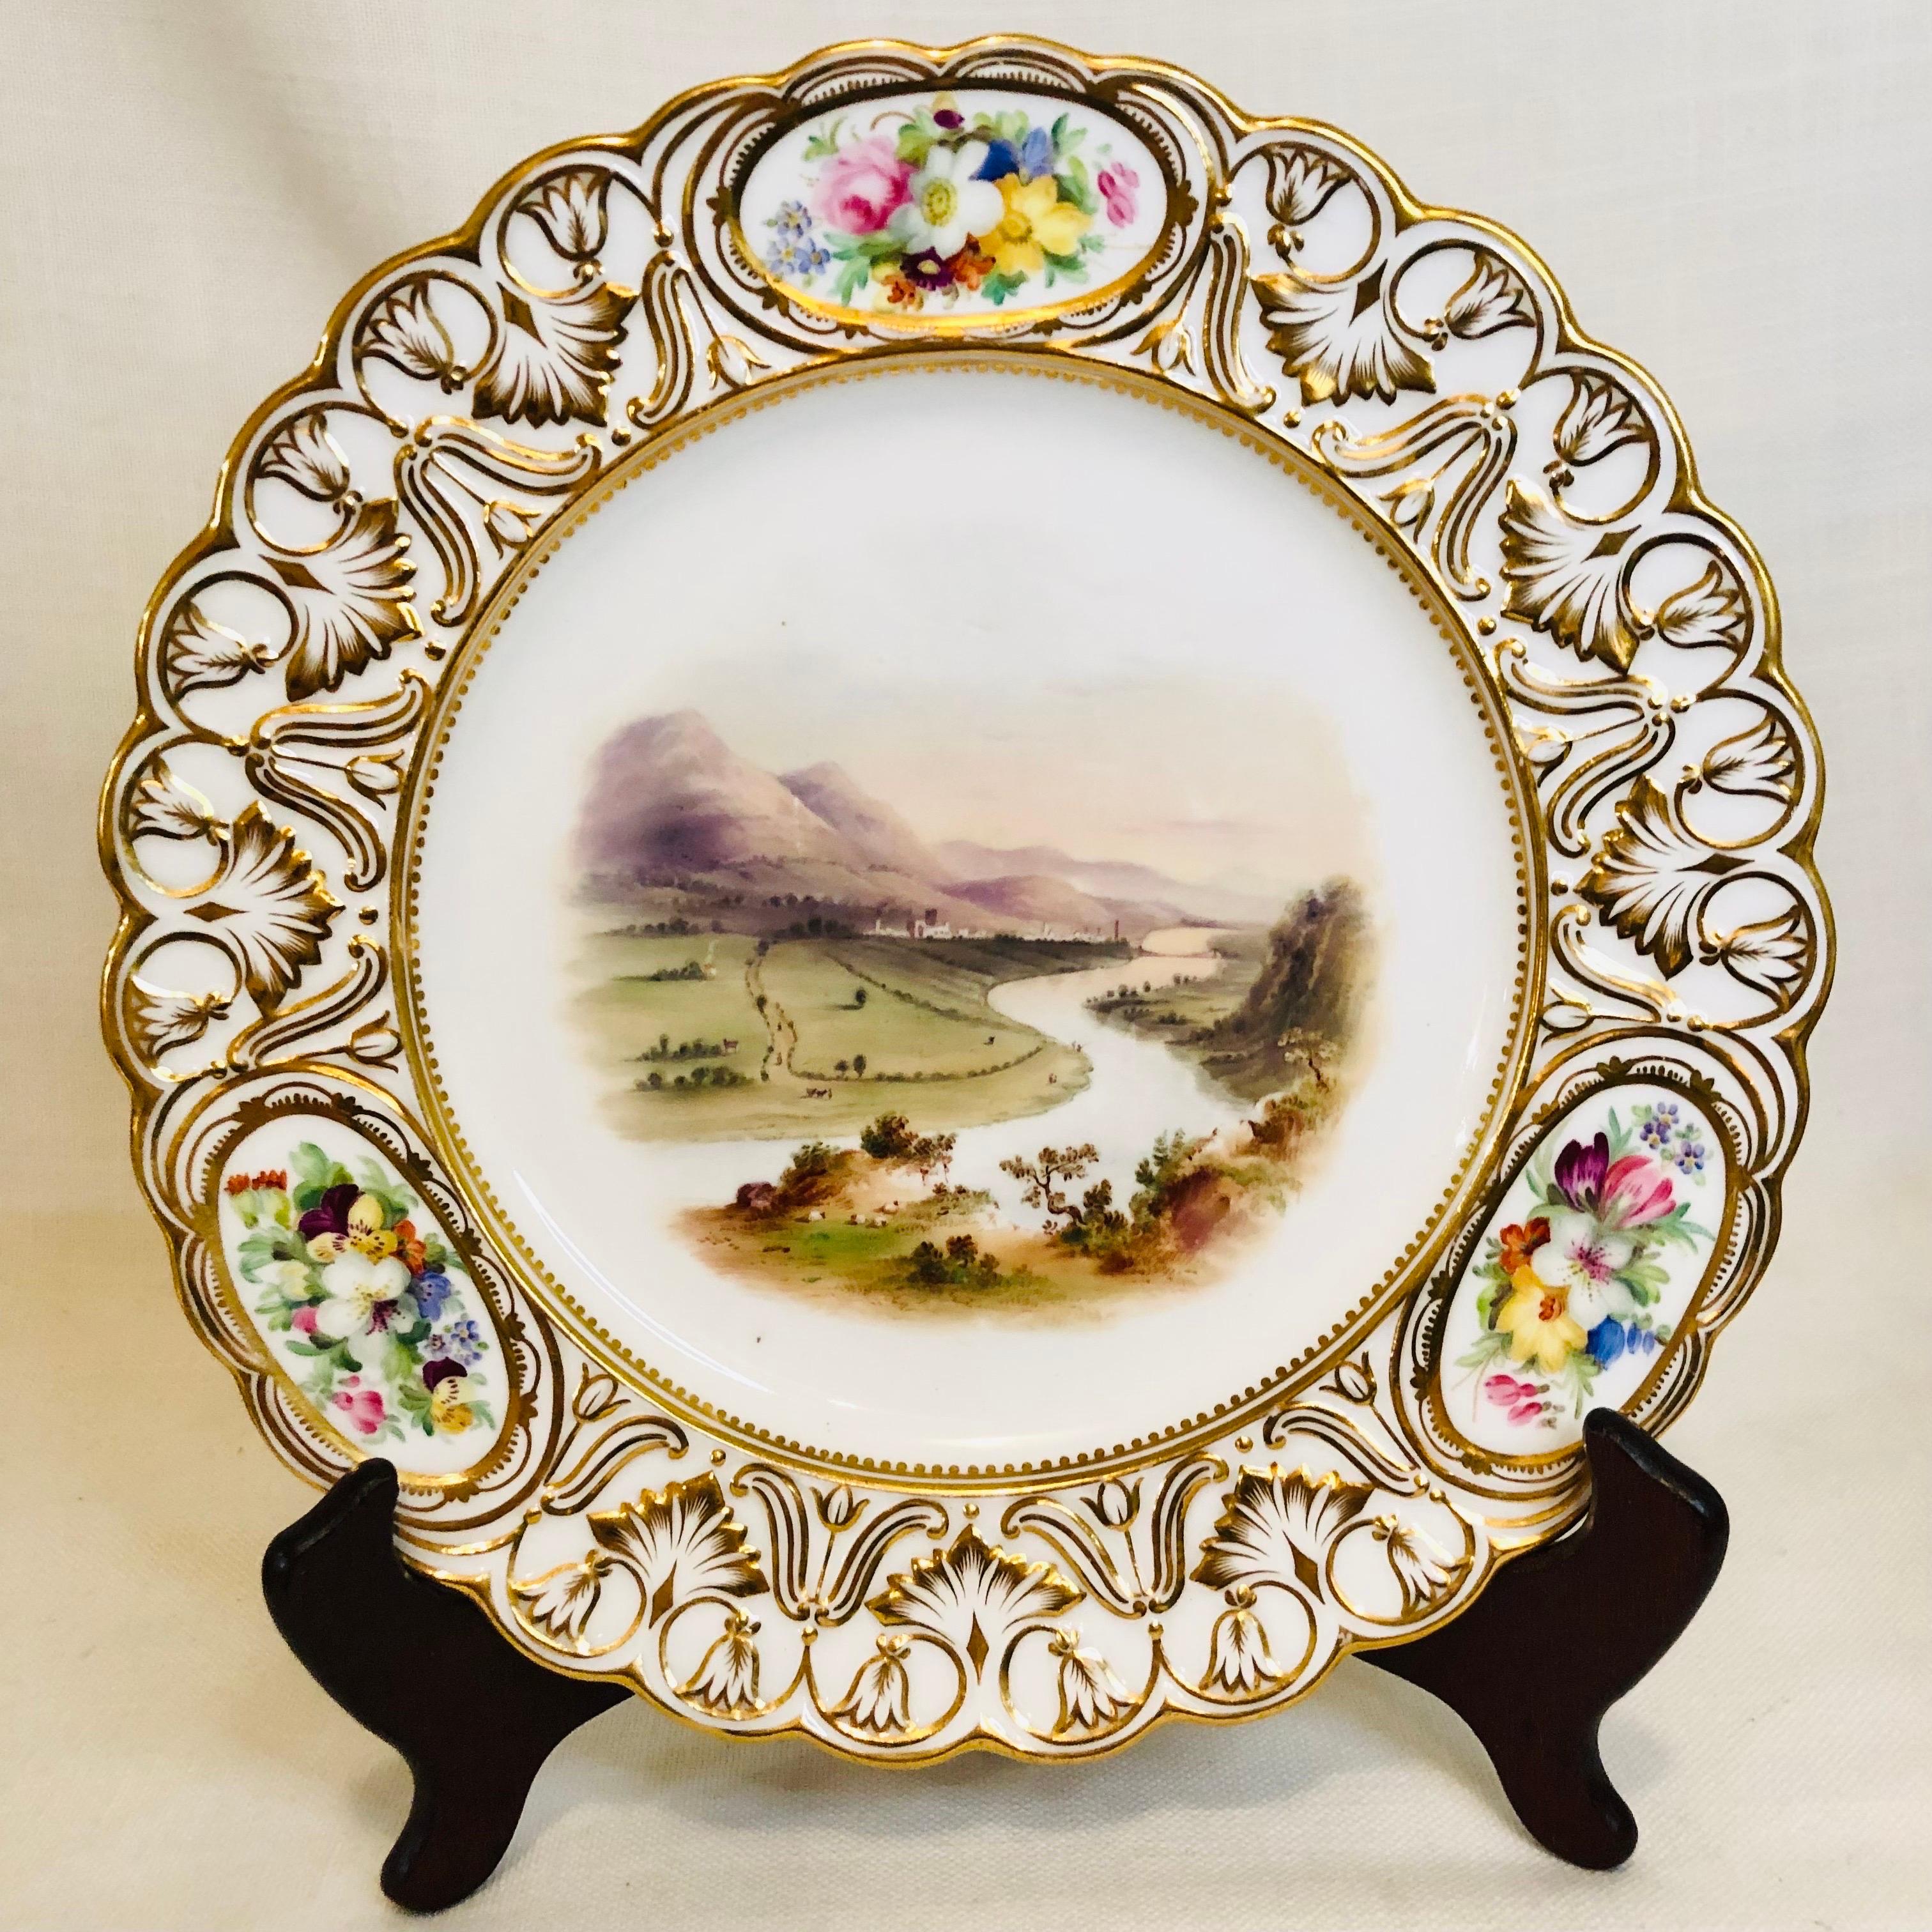 Set of 16 19th Century Coalport Plates Each Hand-Painted with Magnificent Scenes For Sale 8